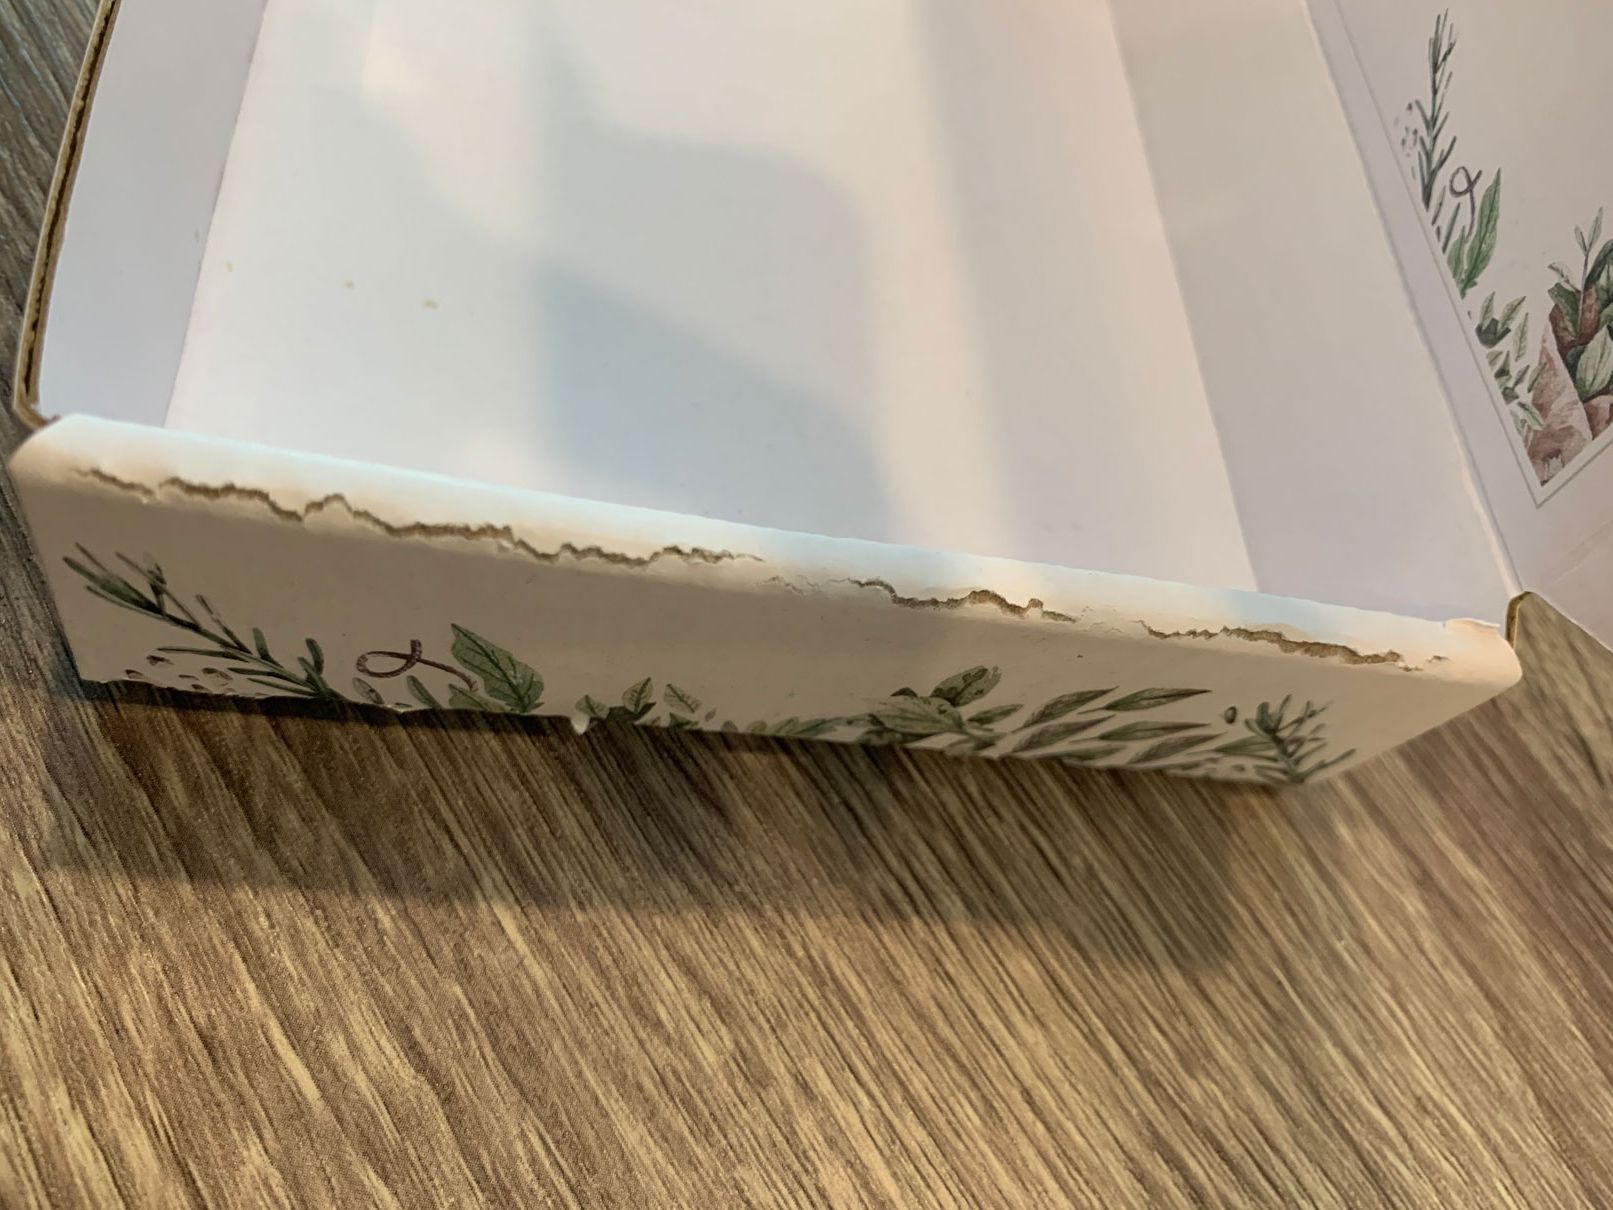 Mailer box with tears in paper